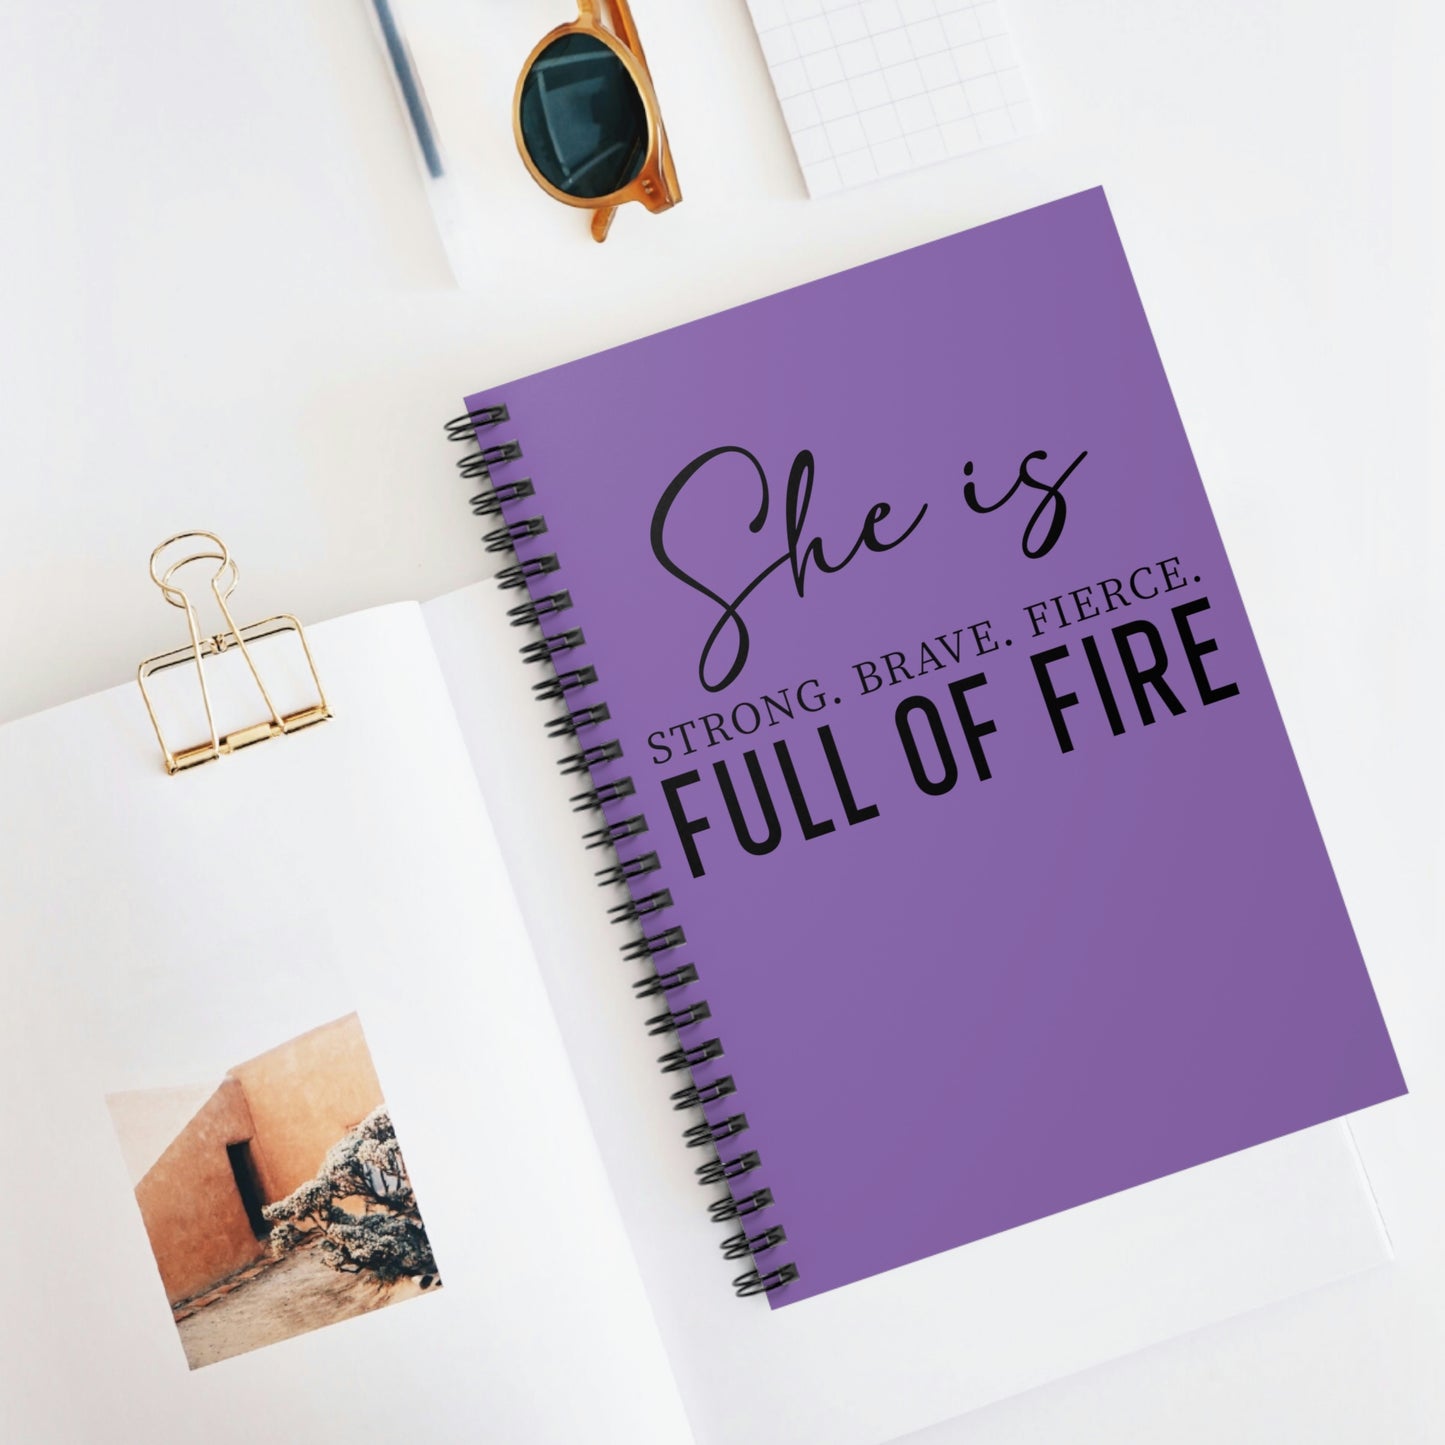 Inspirational (She is Strong, Brave & Fierce/ Spiral Notebook - Ruled Line)